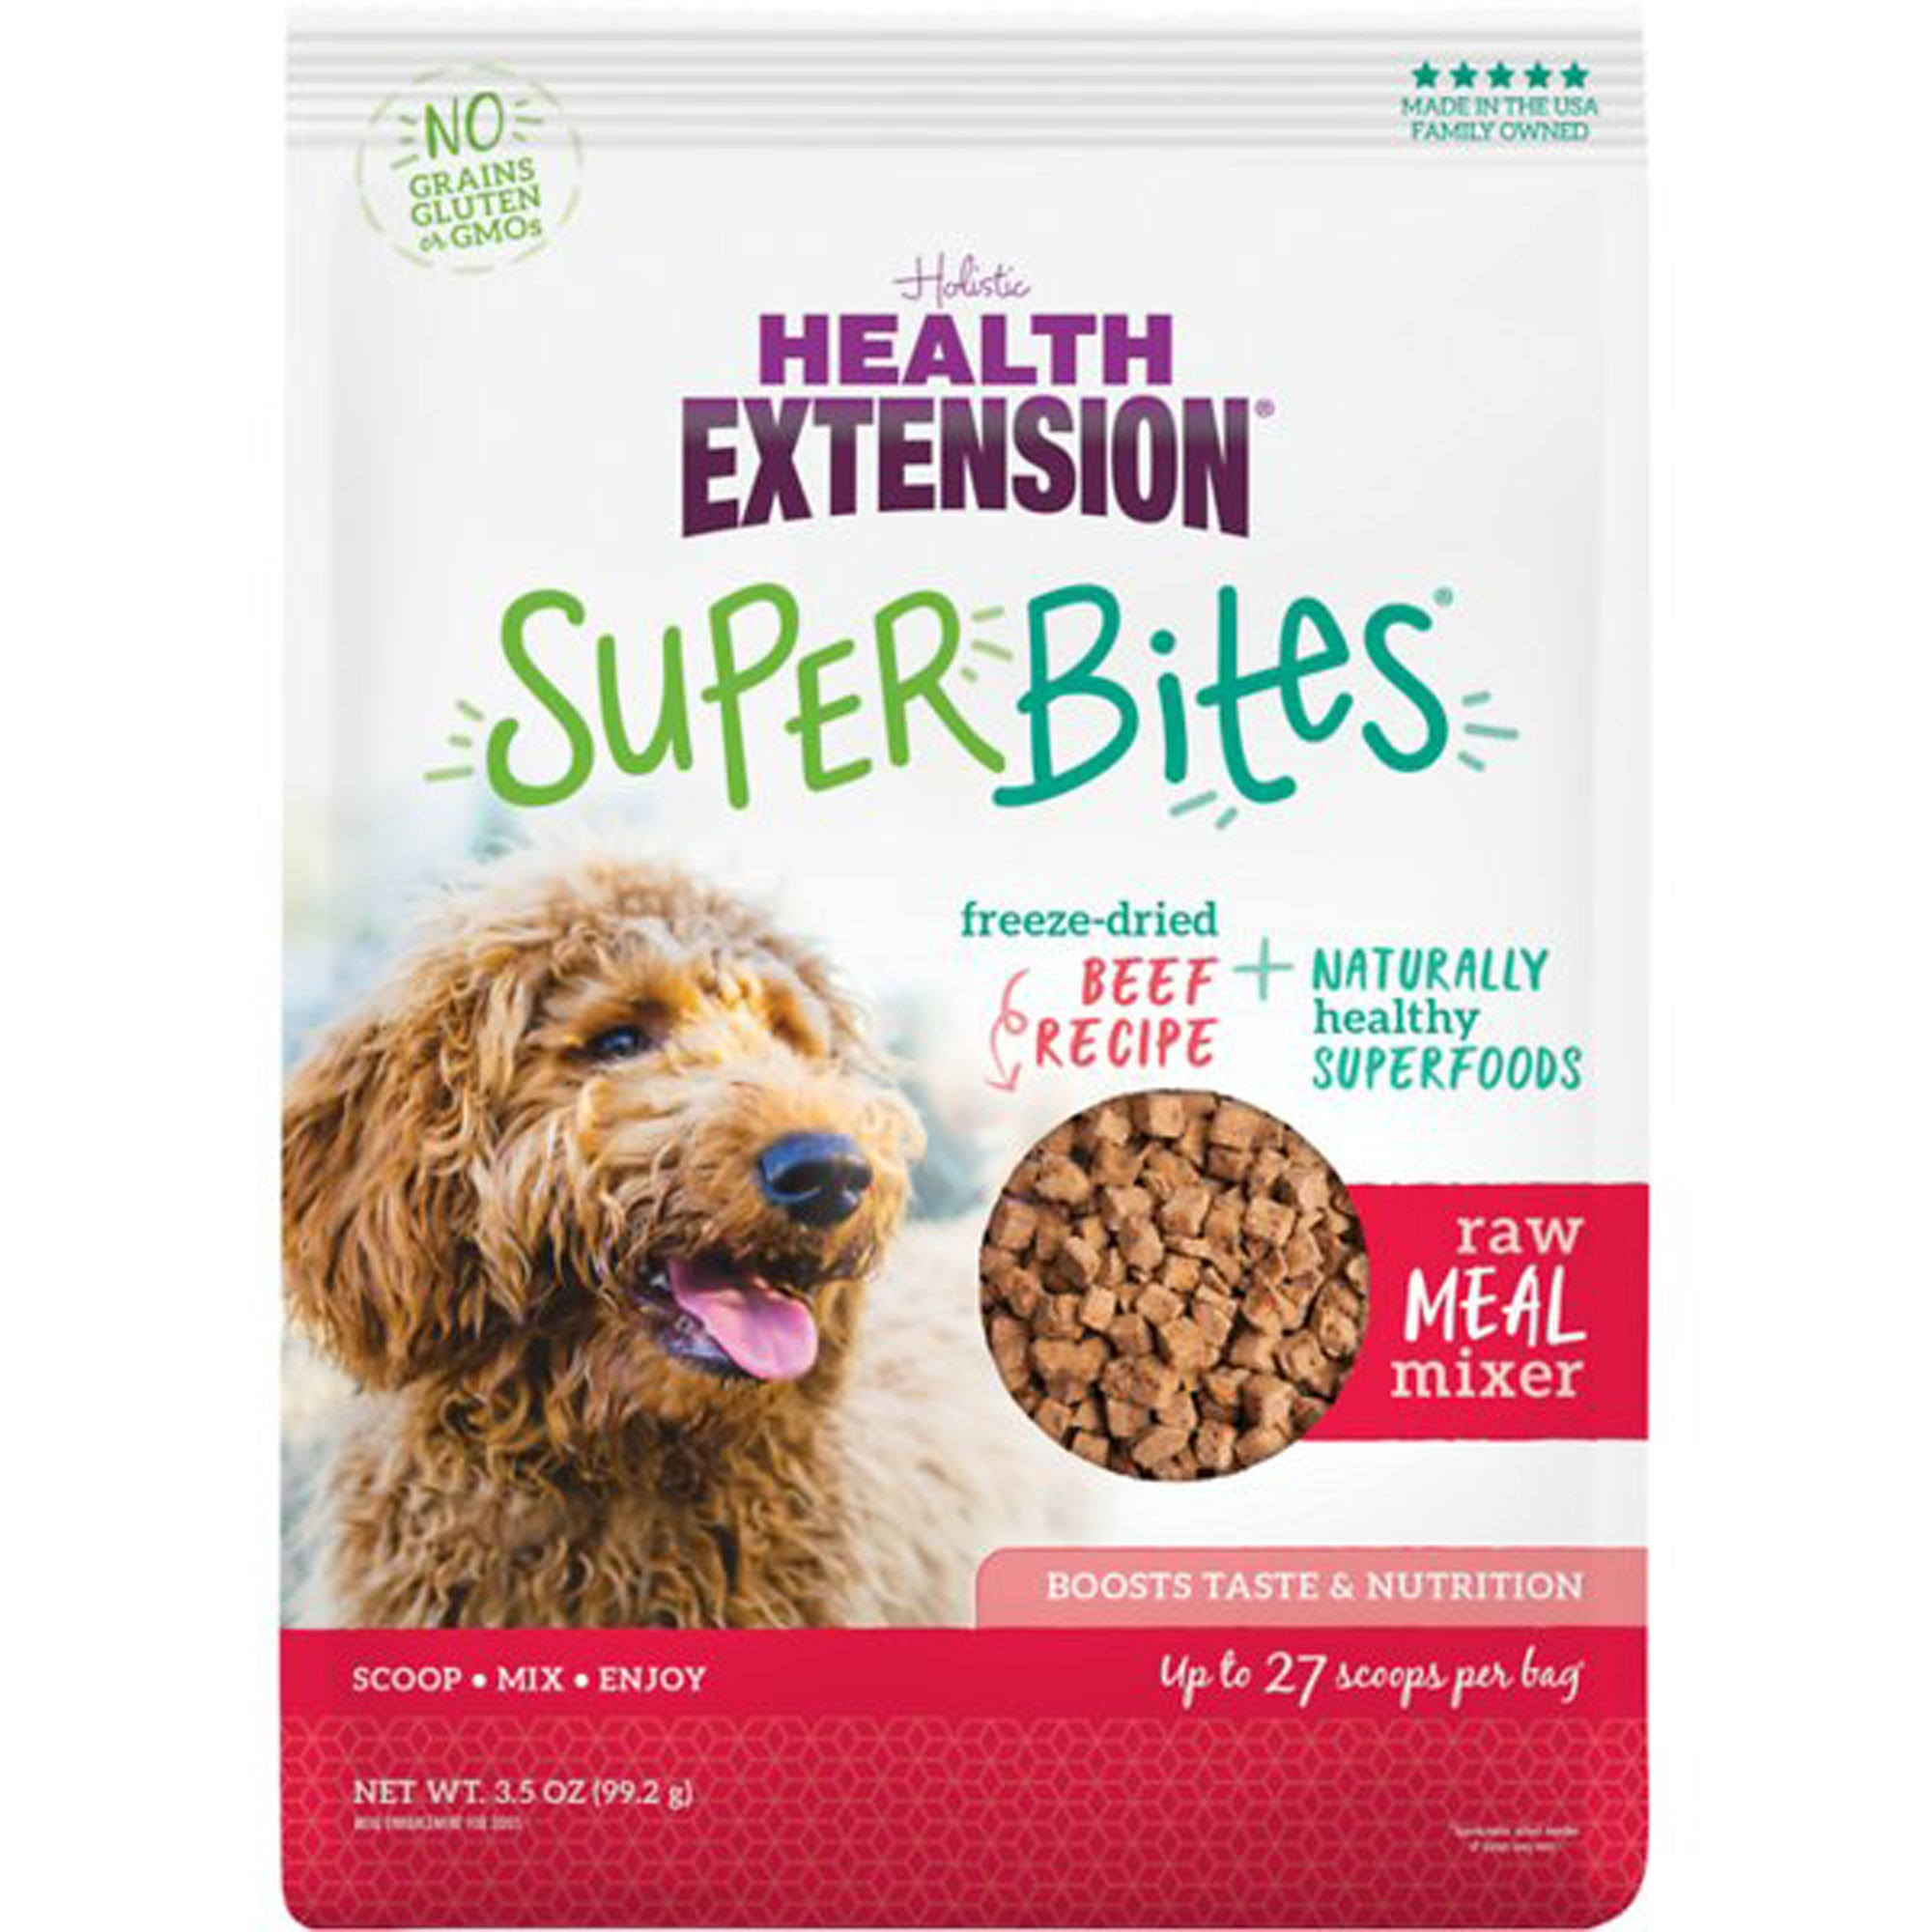 Health Extension SuperBites Freeze-Dried Meal Mixer Beef - 3.5 oz